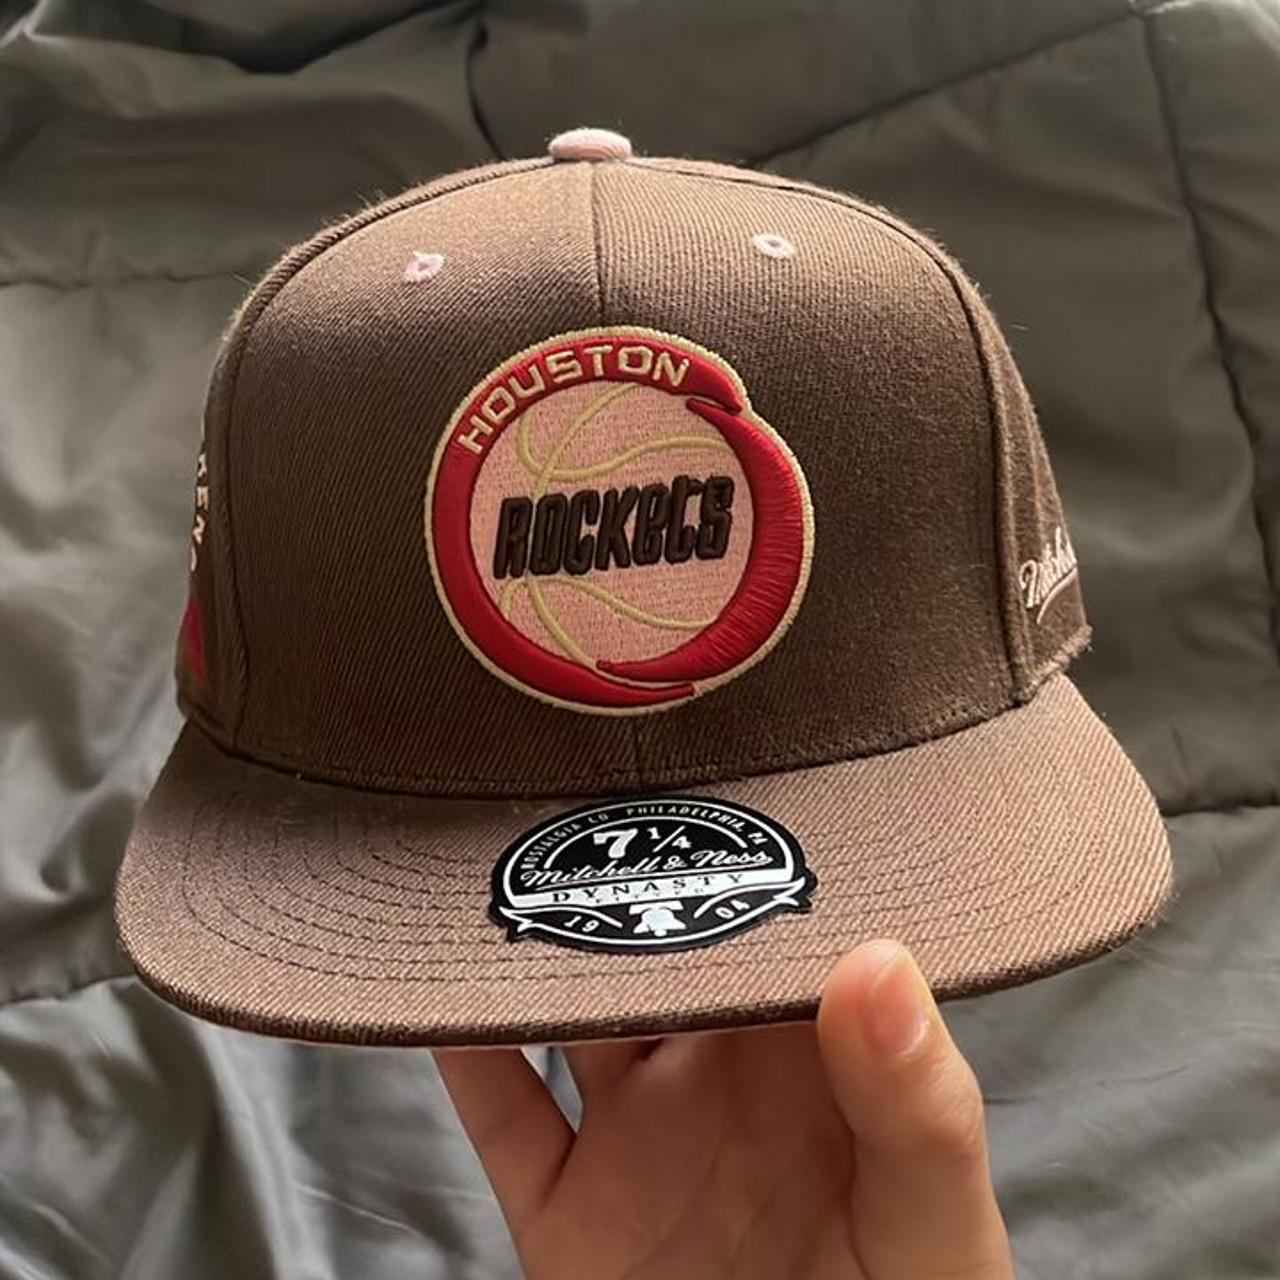 Vintage Mitchell and Ness Mens Large Maroon and Gray - Depop